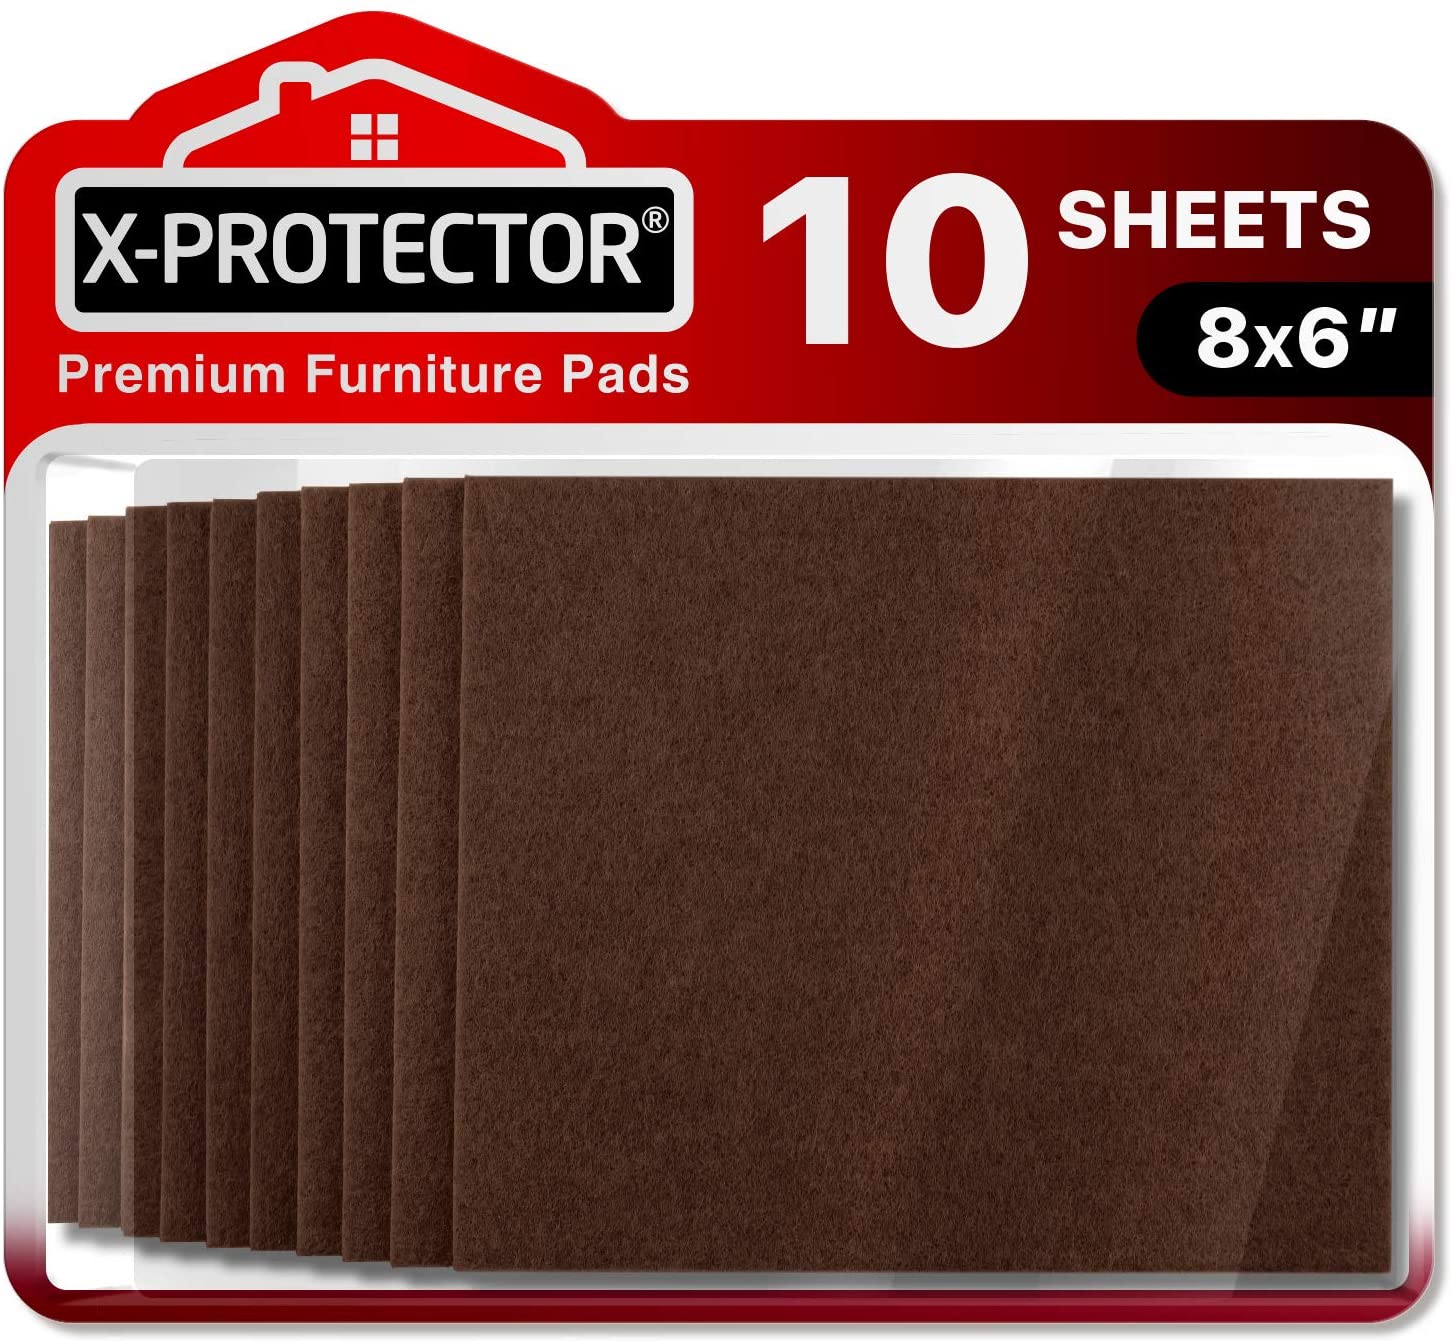 X-Protector, Felt Furniture Pads X-PROTECTOR 10 Pack Premium 8 x 6 - Heavy Duty Felt Sheets 1/5 Thickness! Cut Furniture Felt Pads for Furniture Feet You Need - Perfect Furniture Pads for Hardwood Floors!